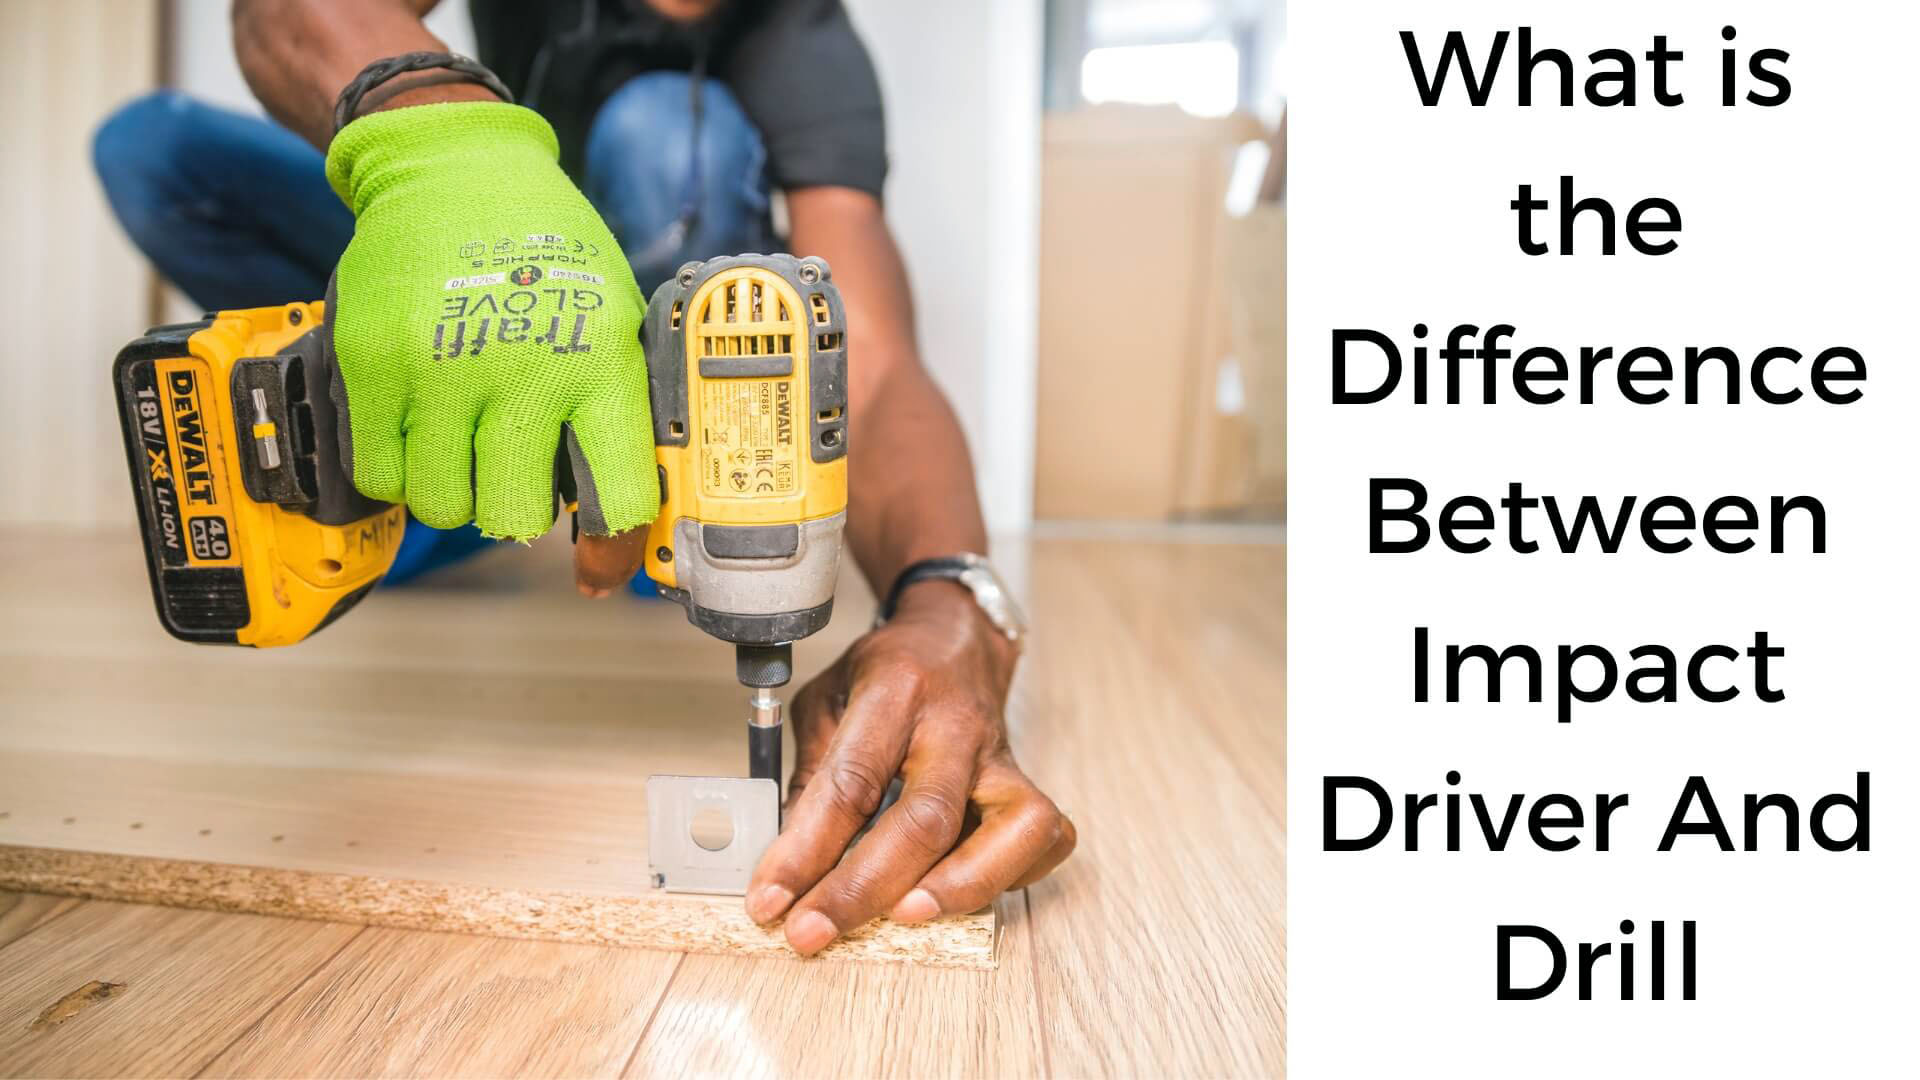 what is the difference between impact driver and drill?